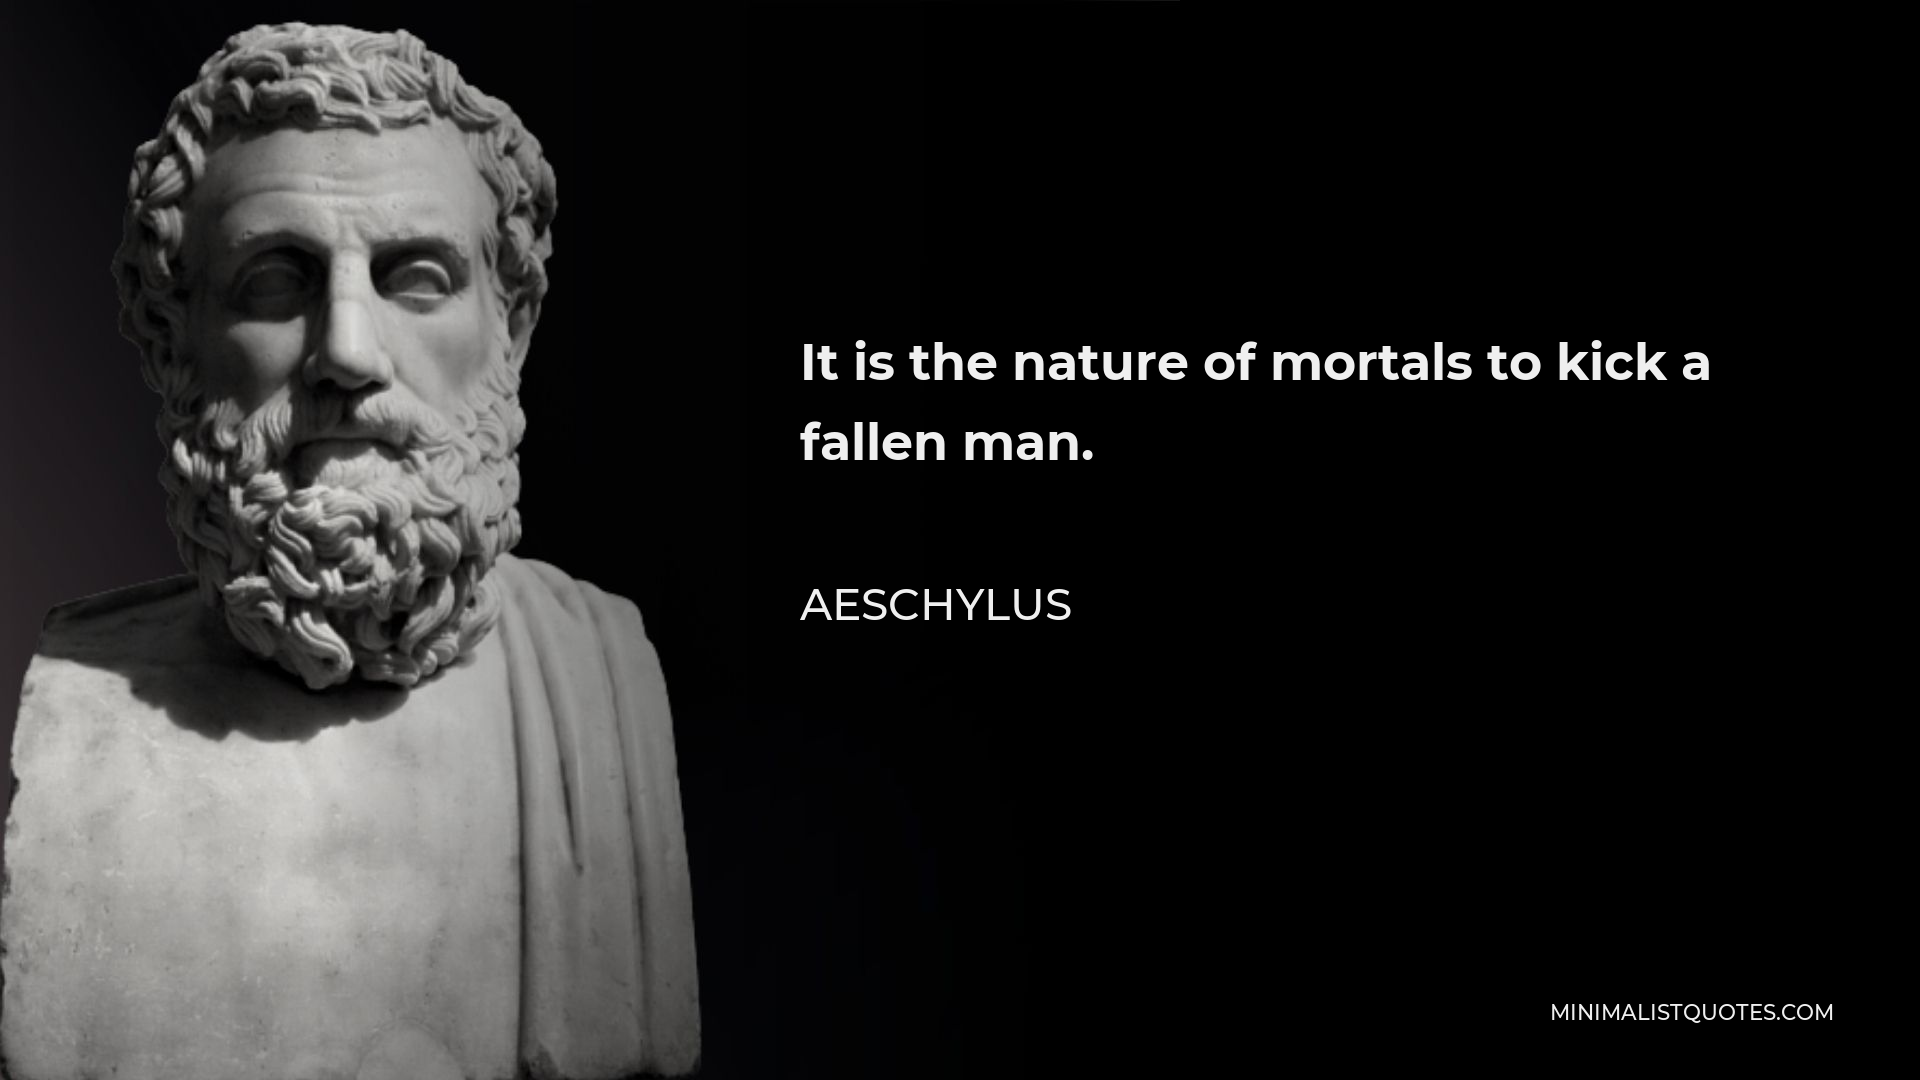 Aeschylus Quote - It is the nature of mortals to kick a fallen man.